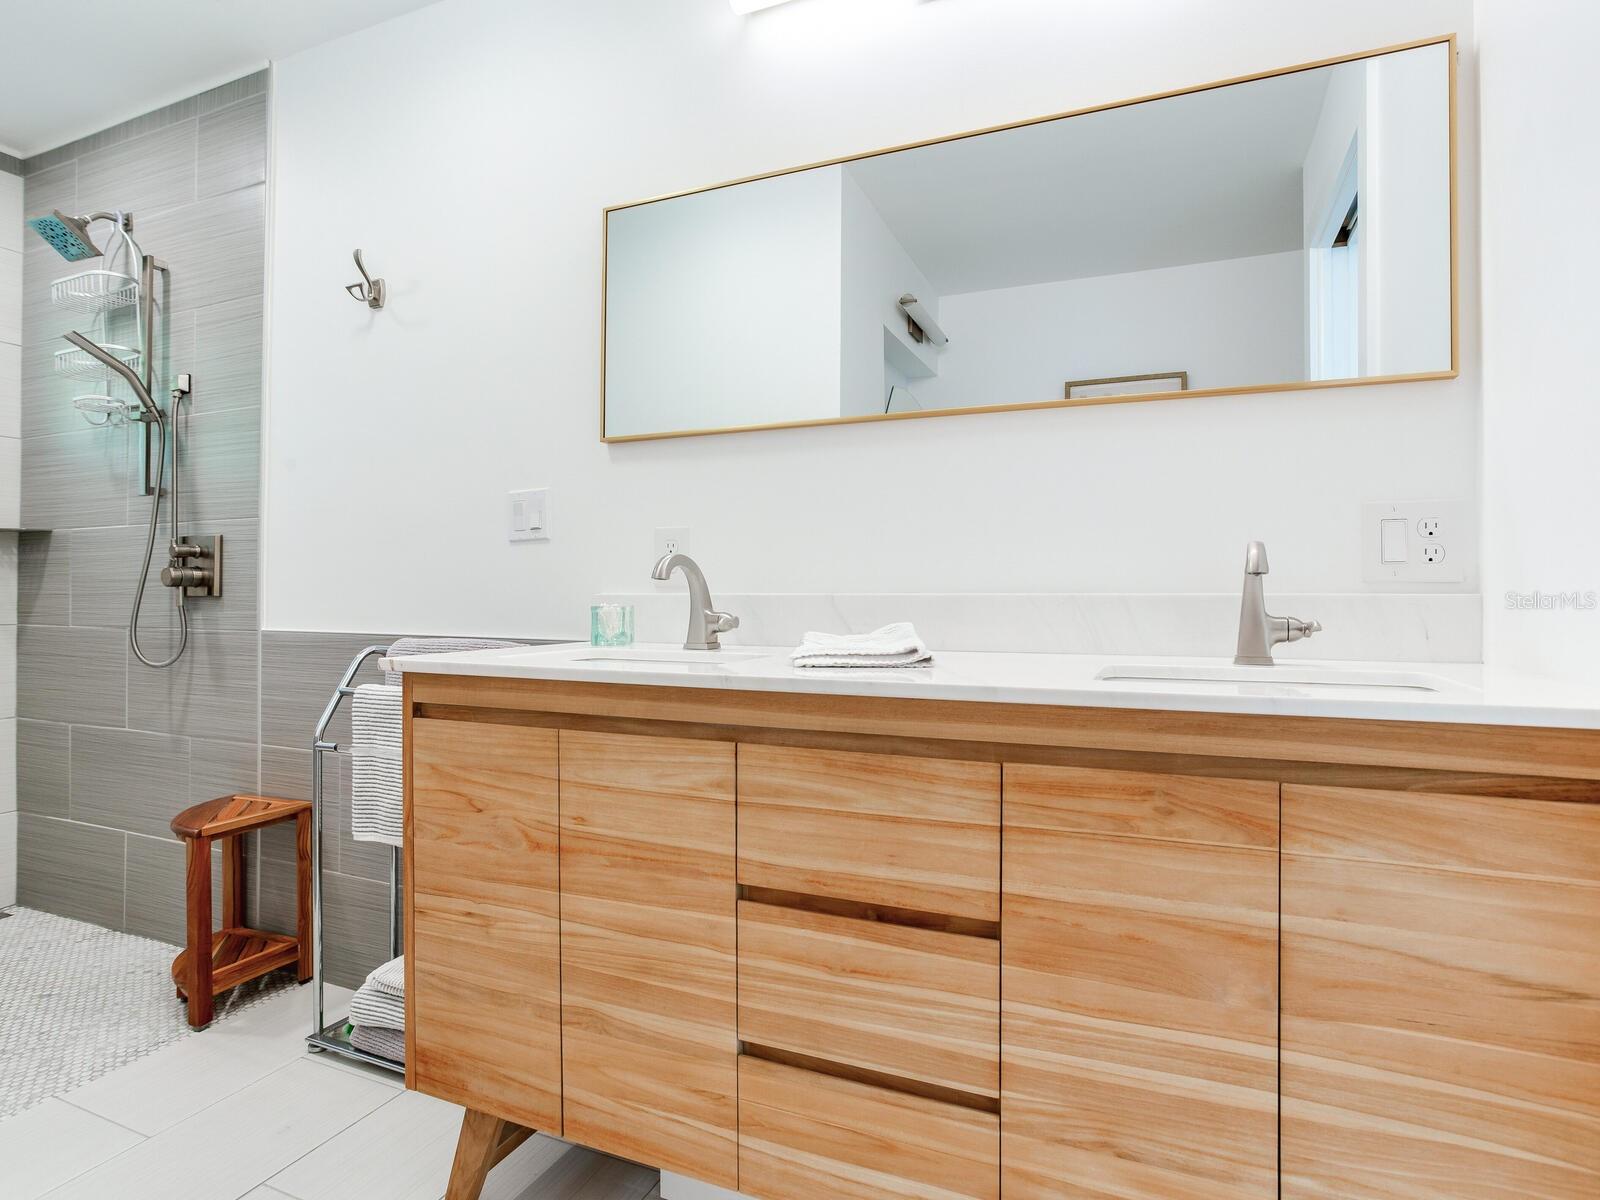 Primary bathroom - Recently built/reconfigured and updated with no-curb shower, double sink vanity, and lighted make-up area.